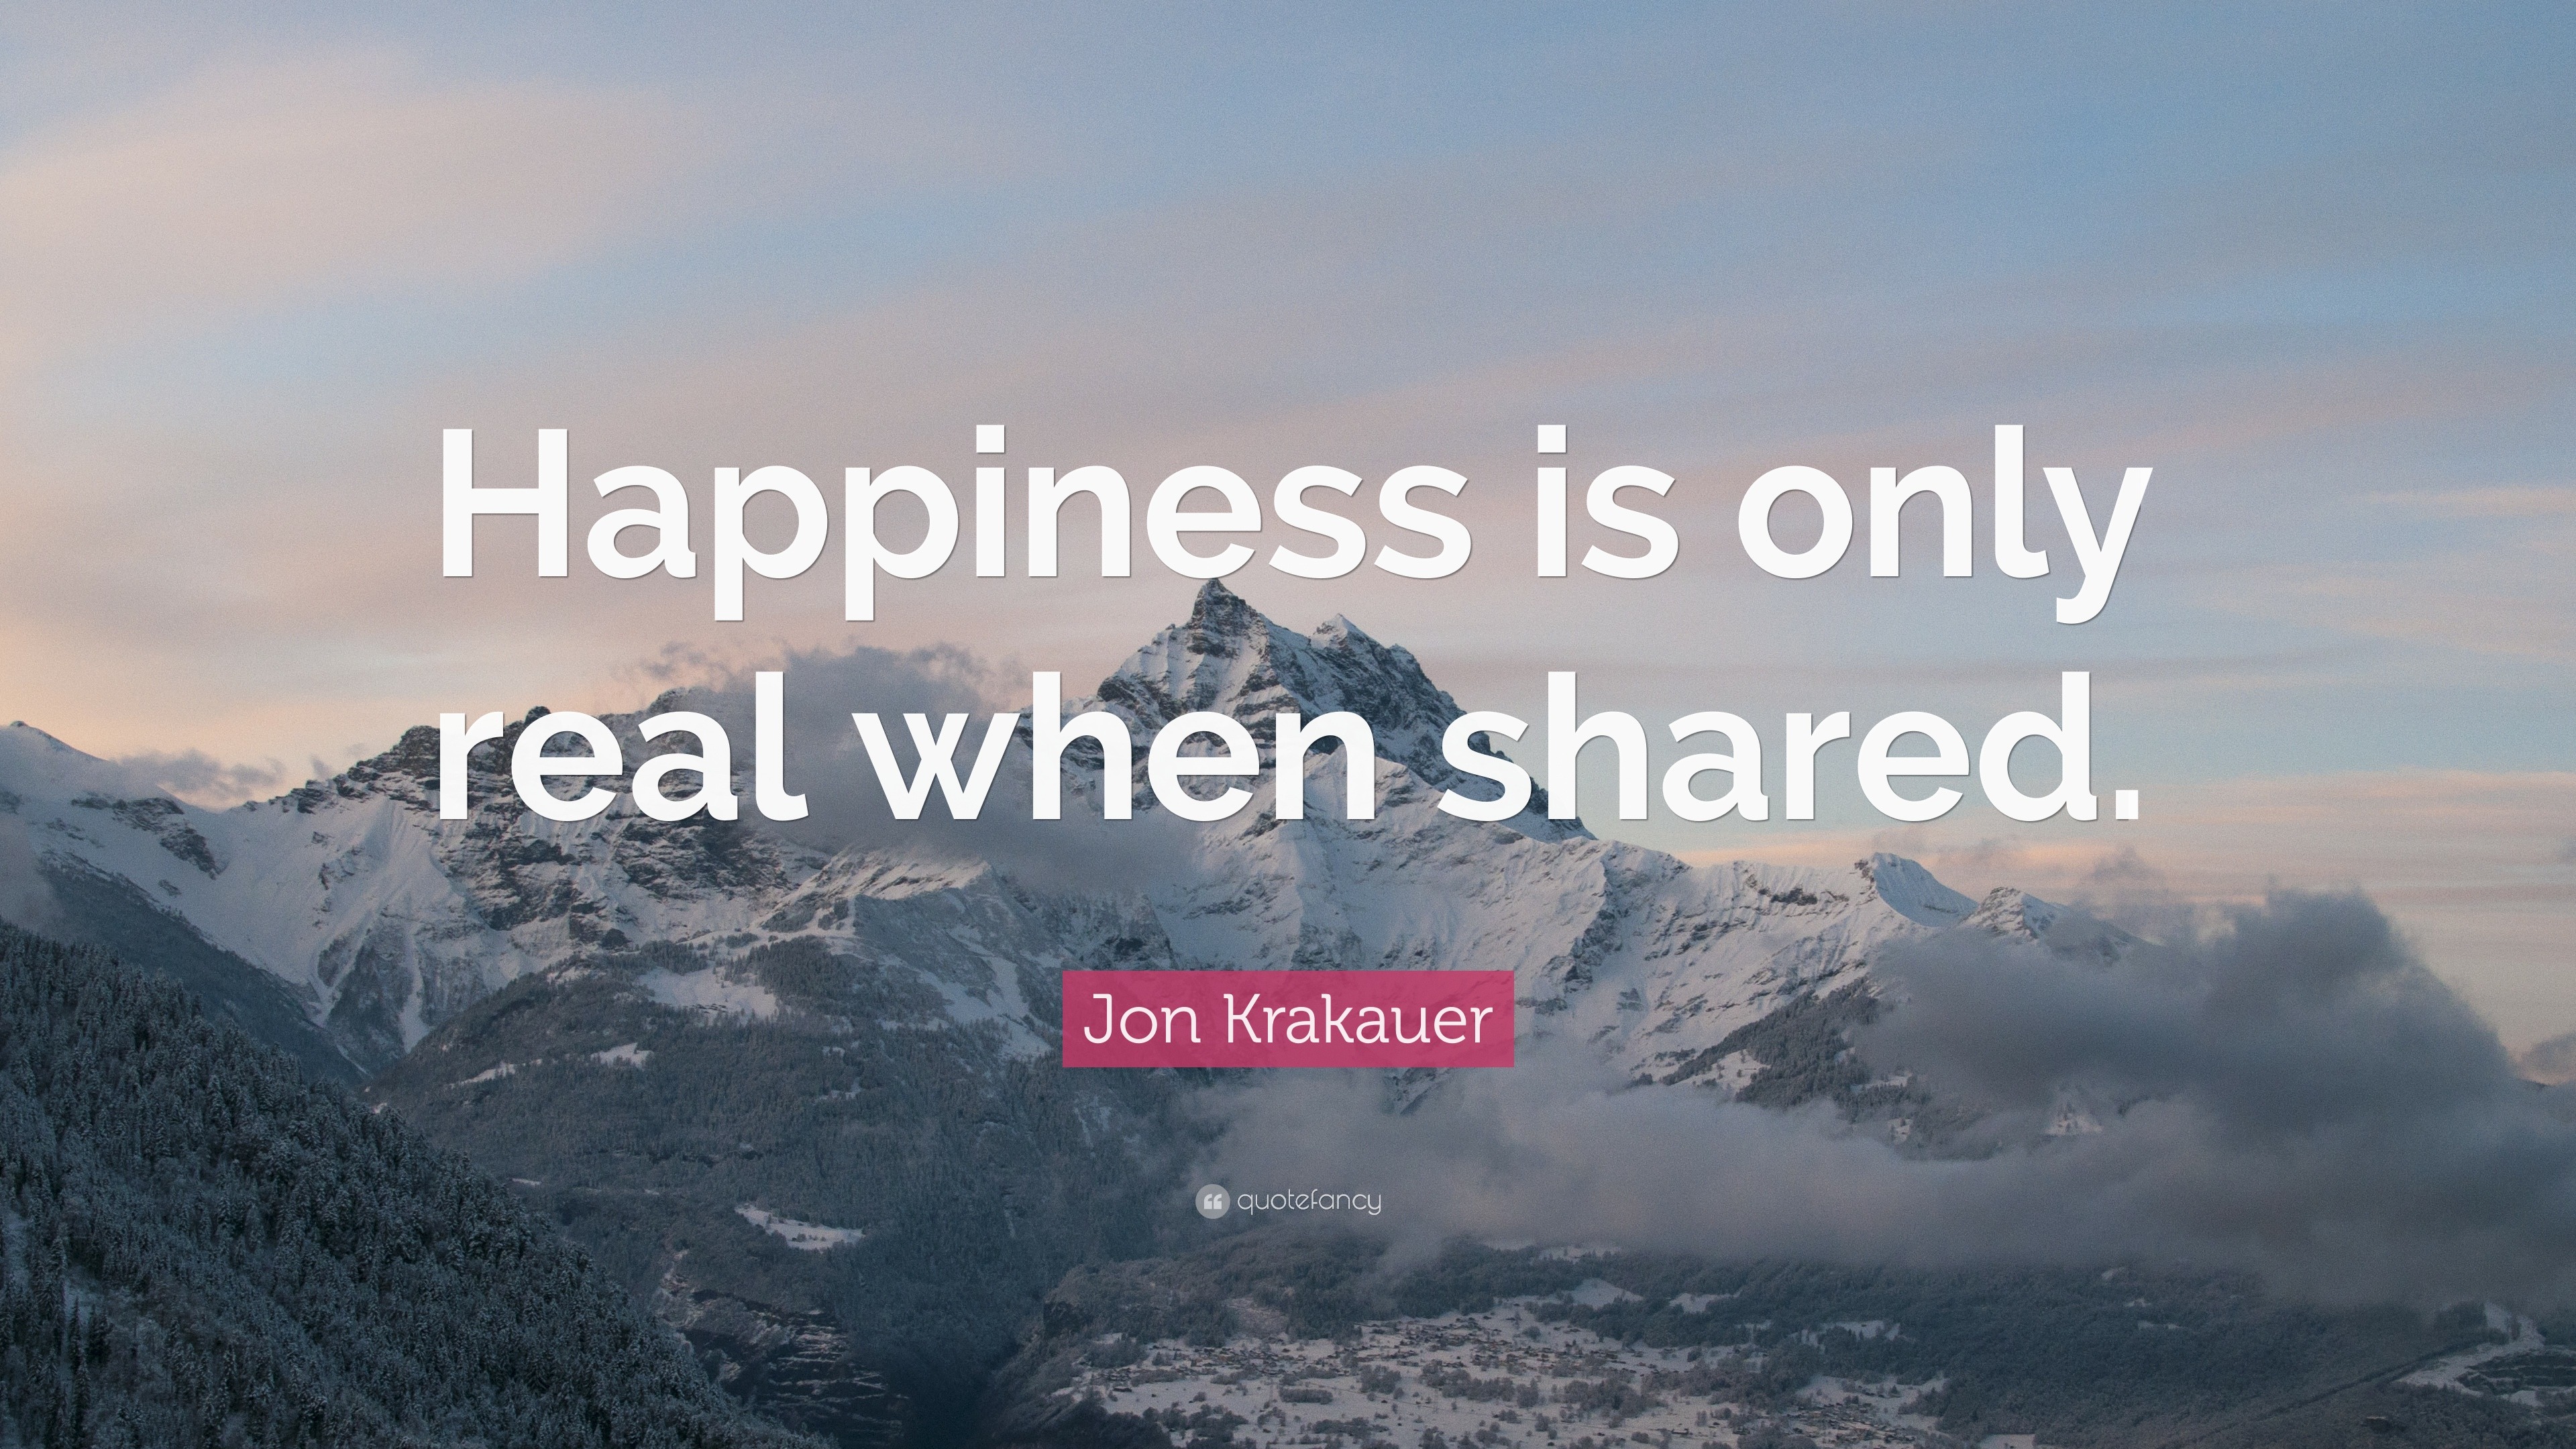 Jon Krakauer Quote: “Happiness is only real when shared.” (17